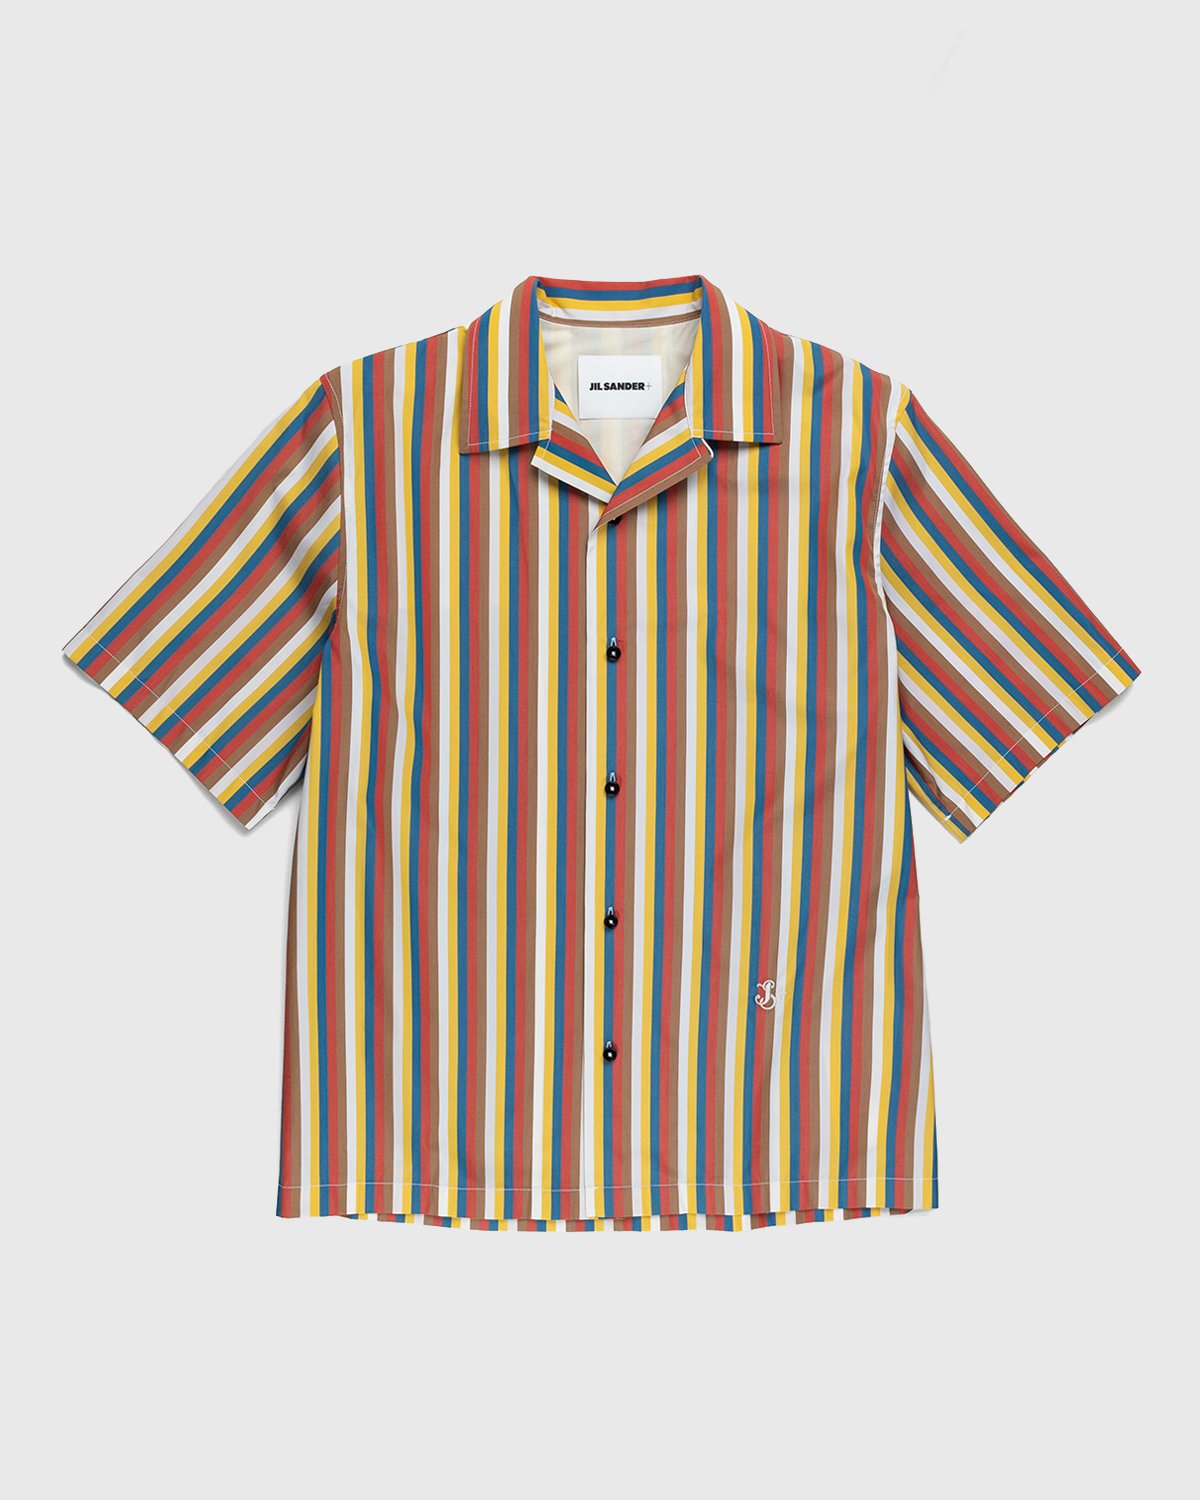 Jil Sander - Striped Vacation Shirt Red/White - Clothing - Red - Image 1